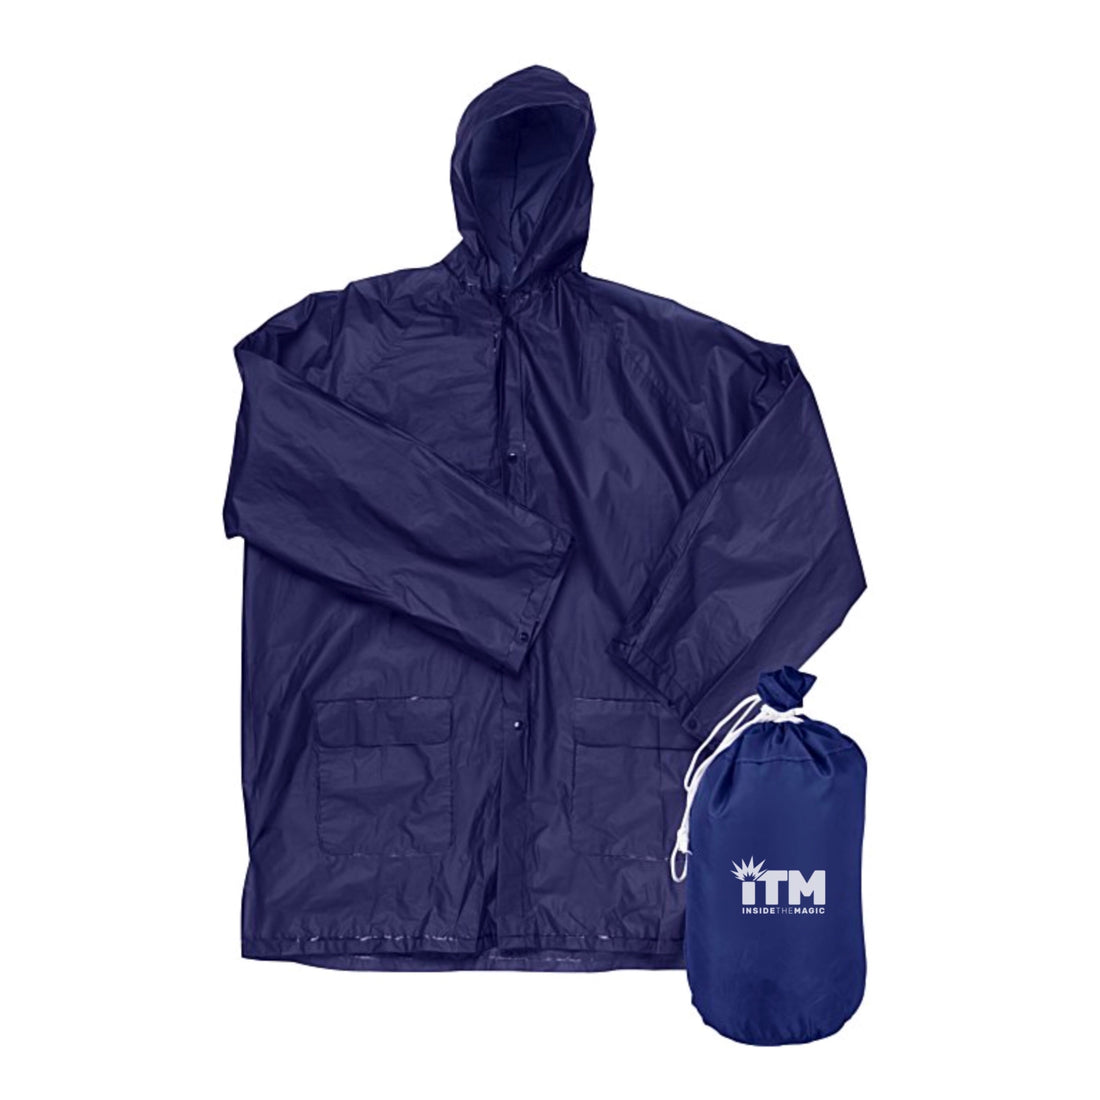 ITM Rain Jacket to Pouch